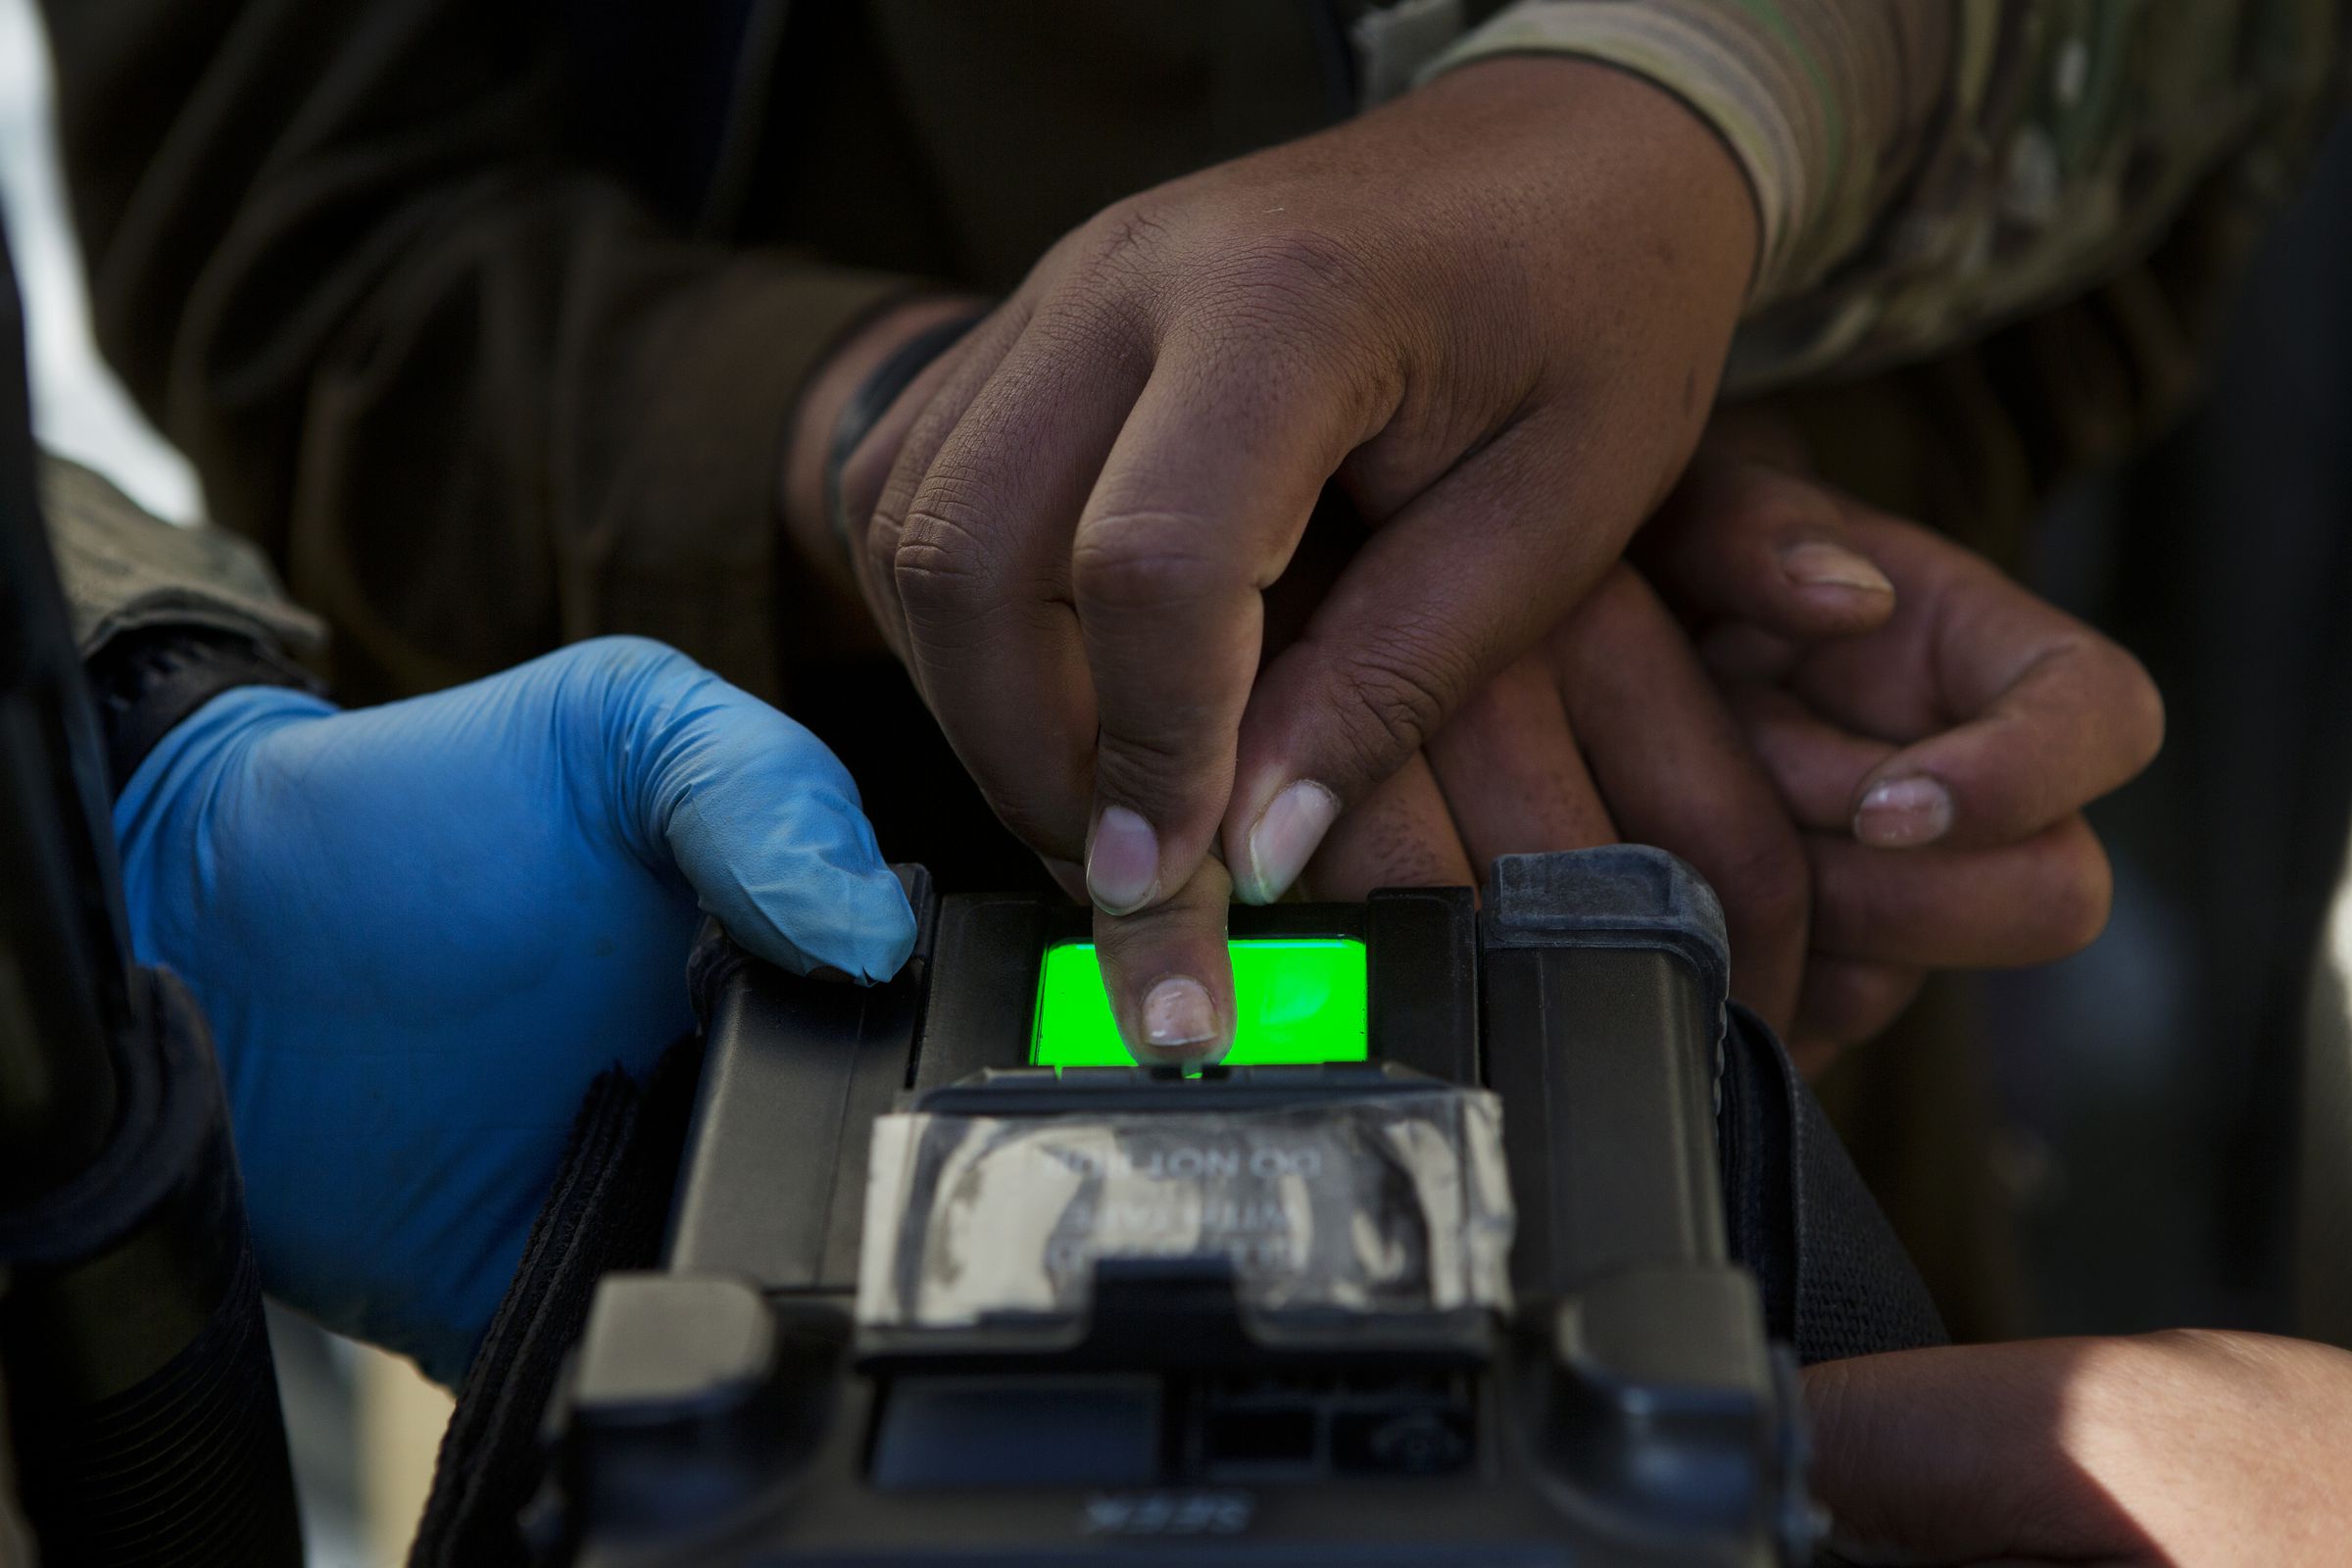 Photo of U.S. Troops In Afghanistan collecting someone’s fingerprint.